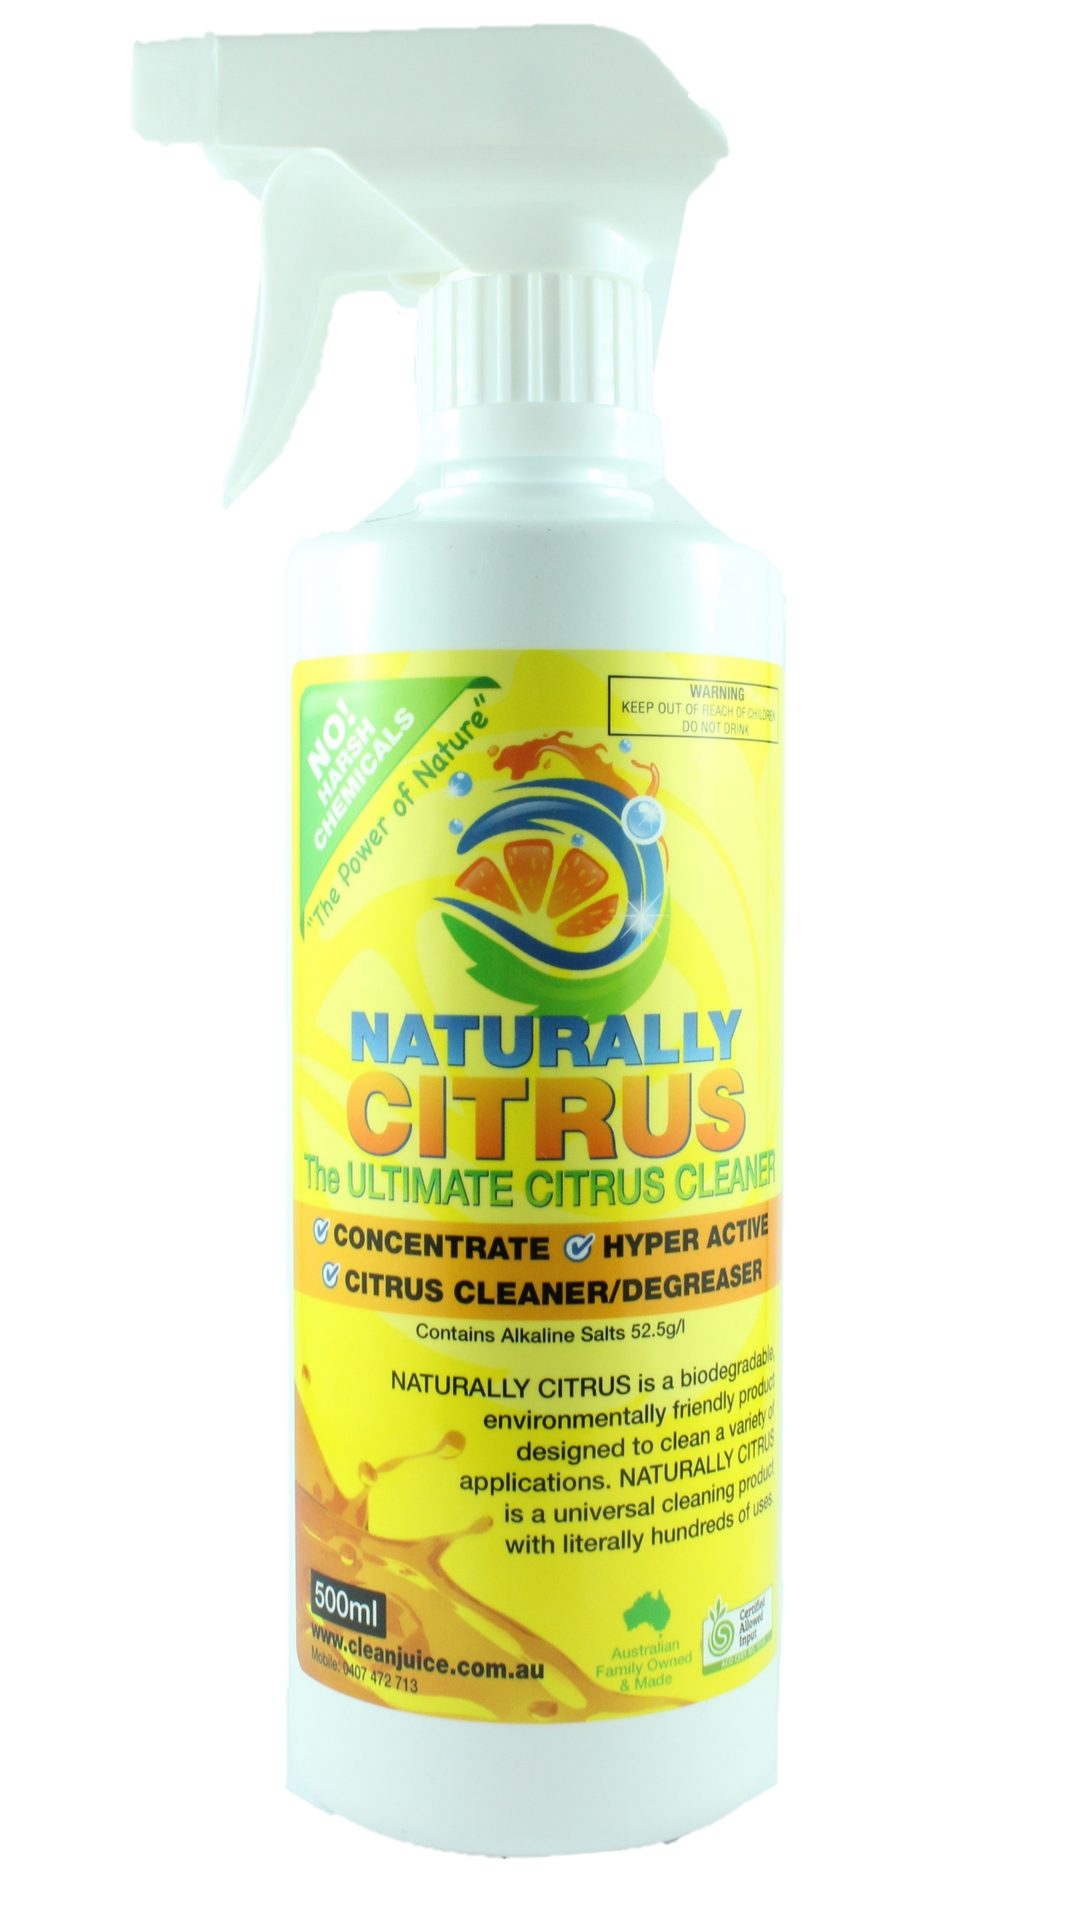 Clean Juice - RENAMED - NATURALLY CITRUS The Ultimate Citrus Cleaner